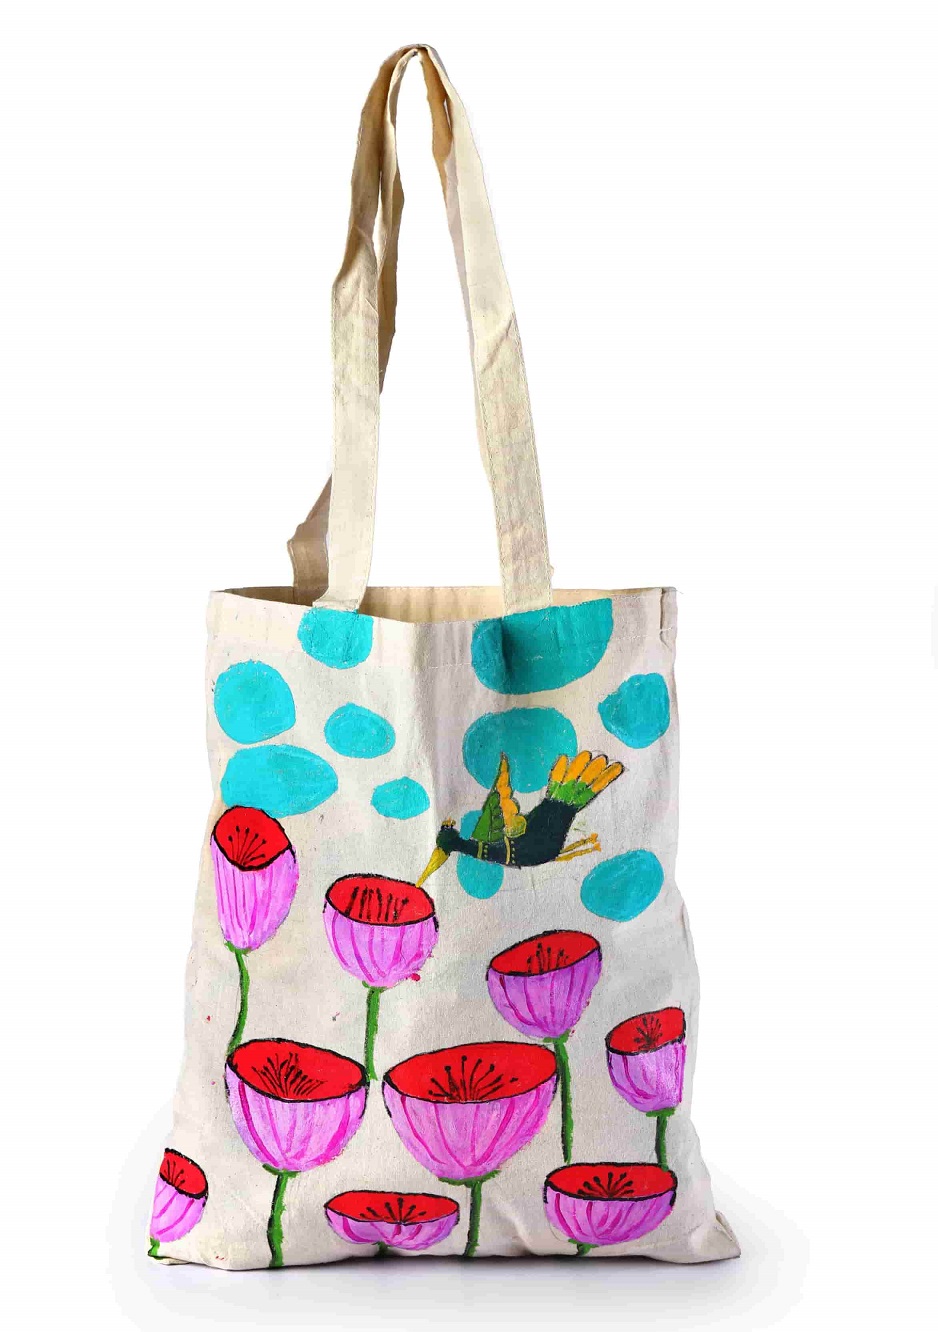 Personalised Cotton Prmotional Tote Bags For Daily Use